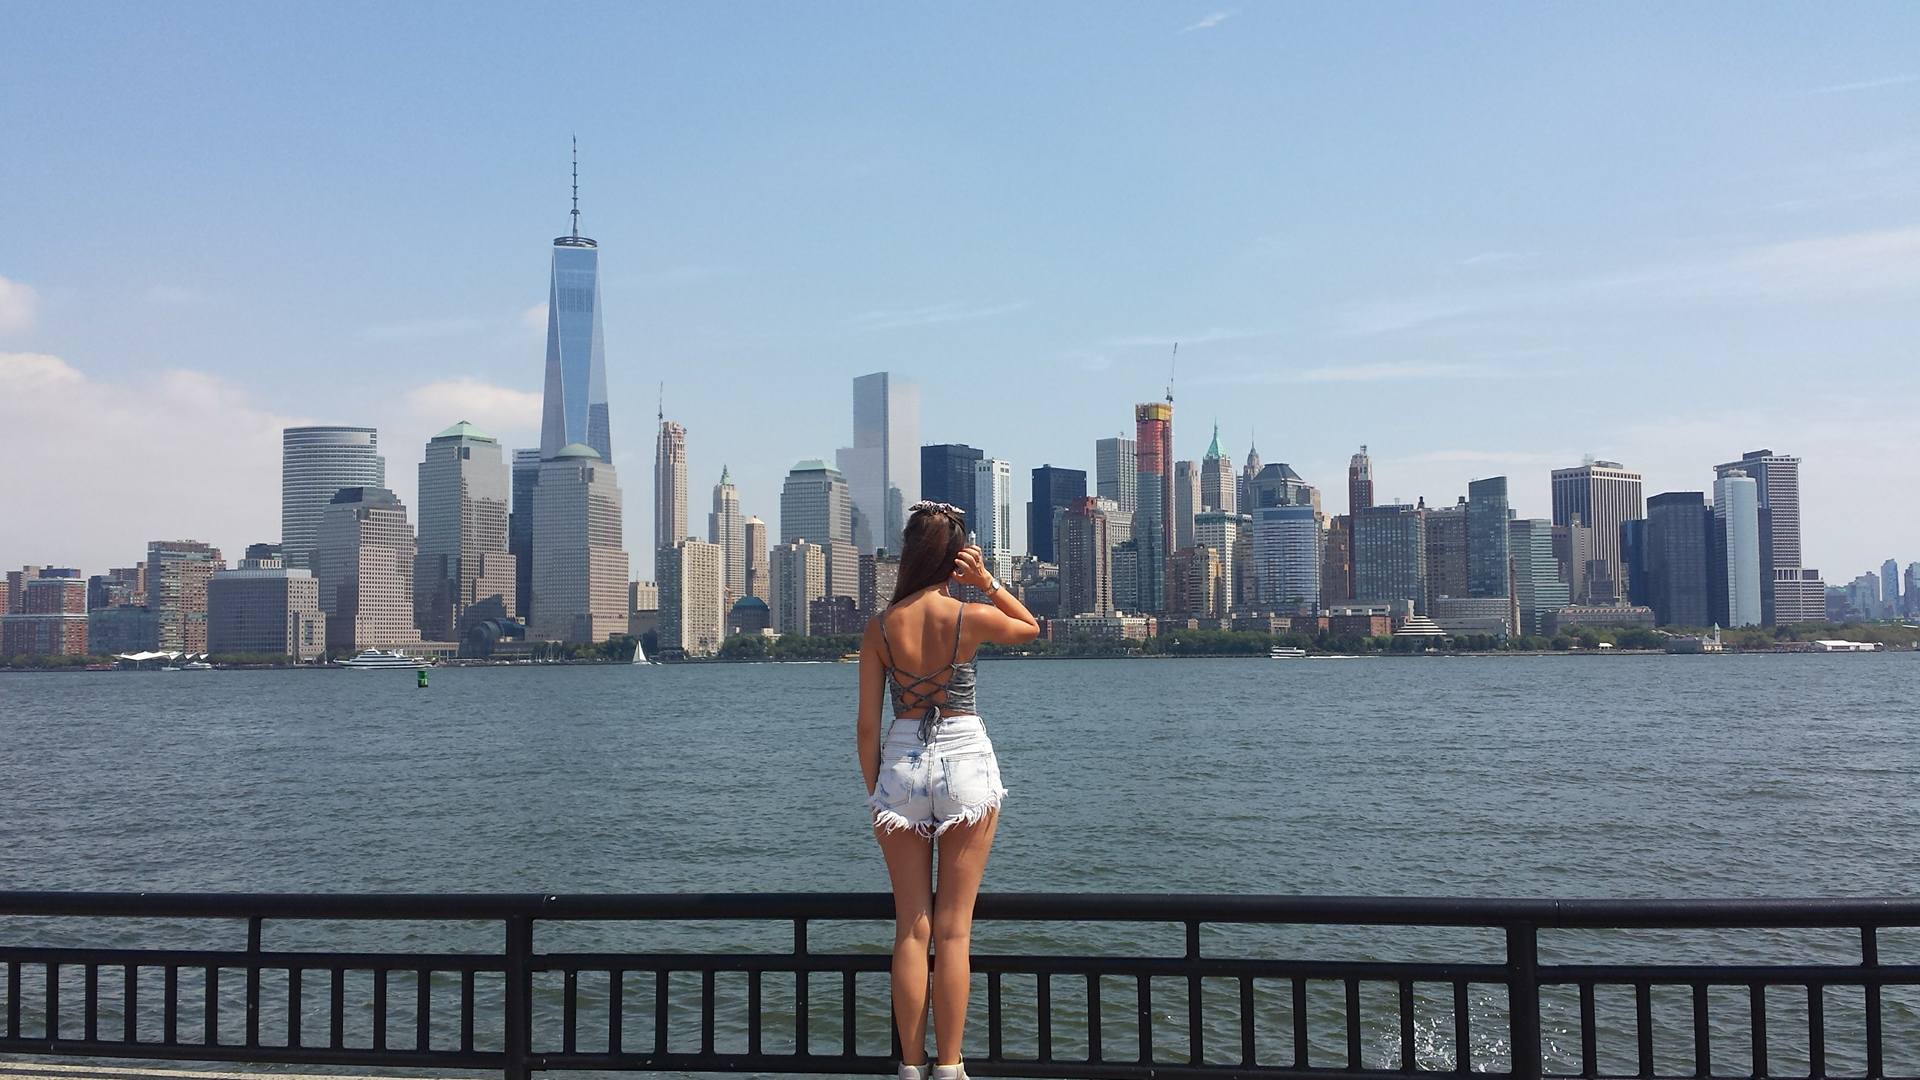 Portrait of Carly looking at New York City skyline